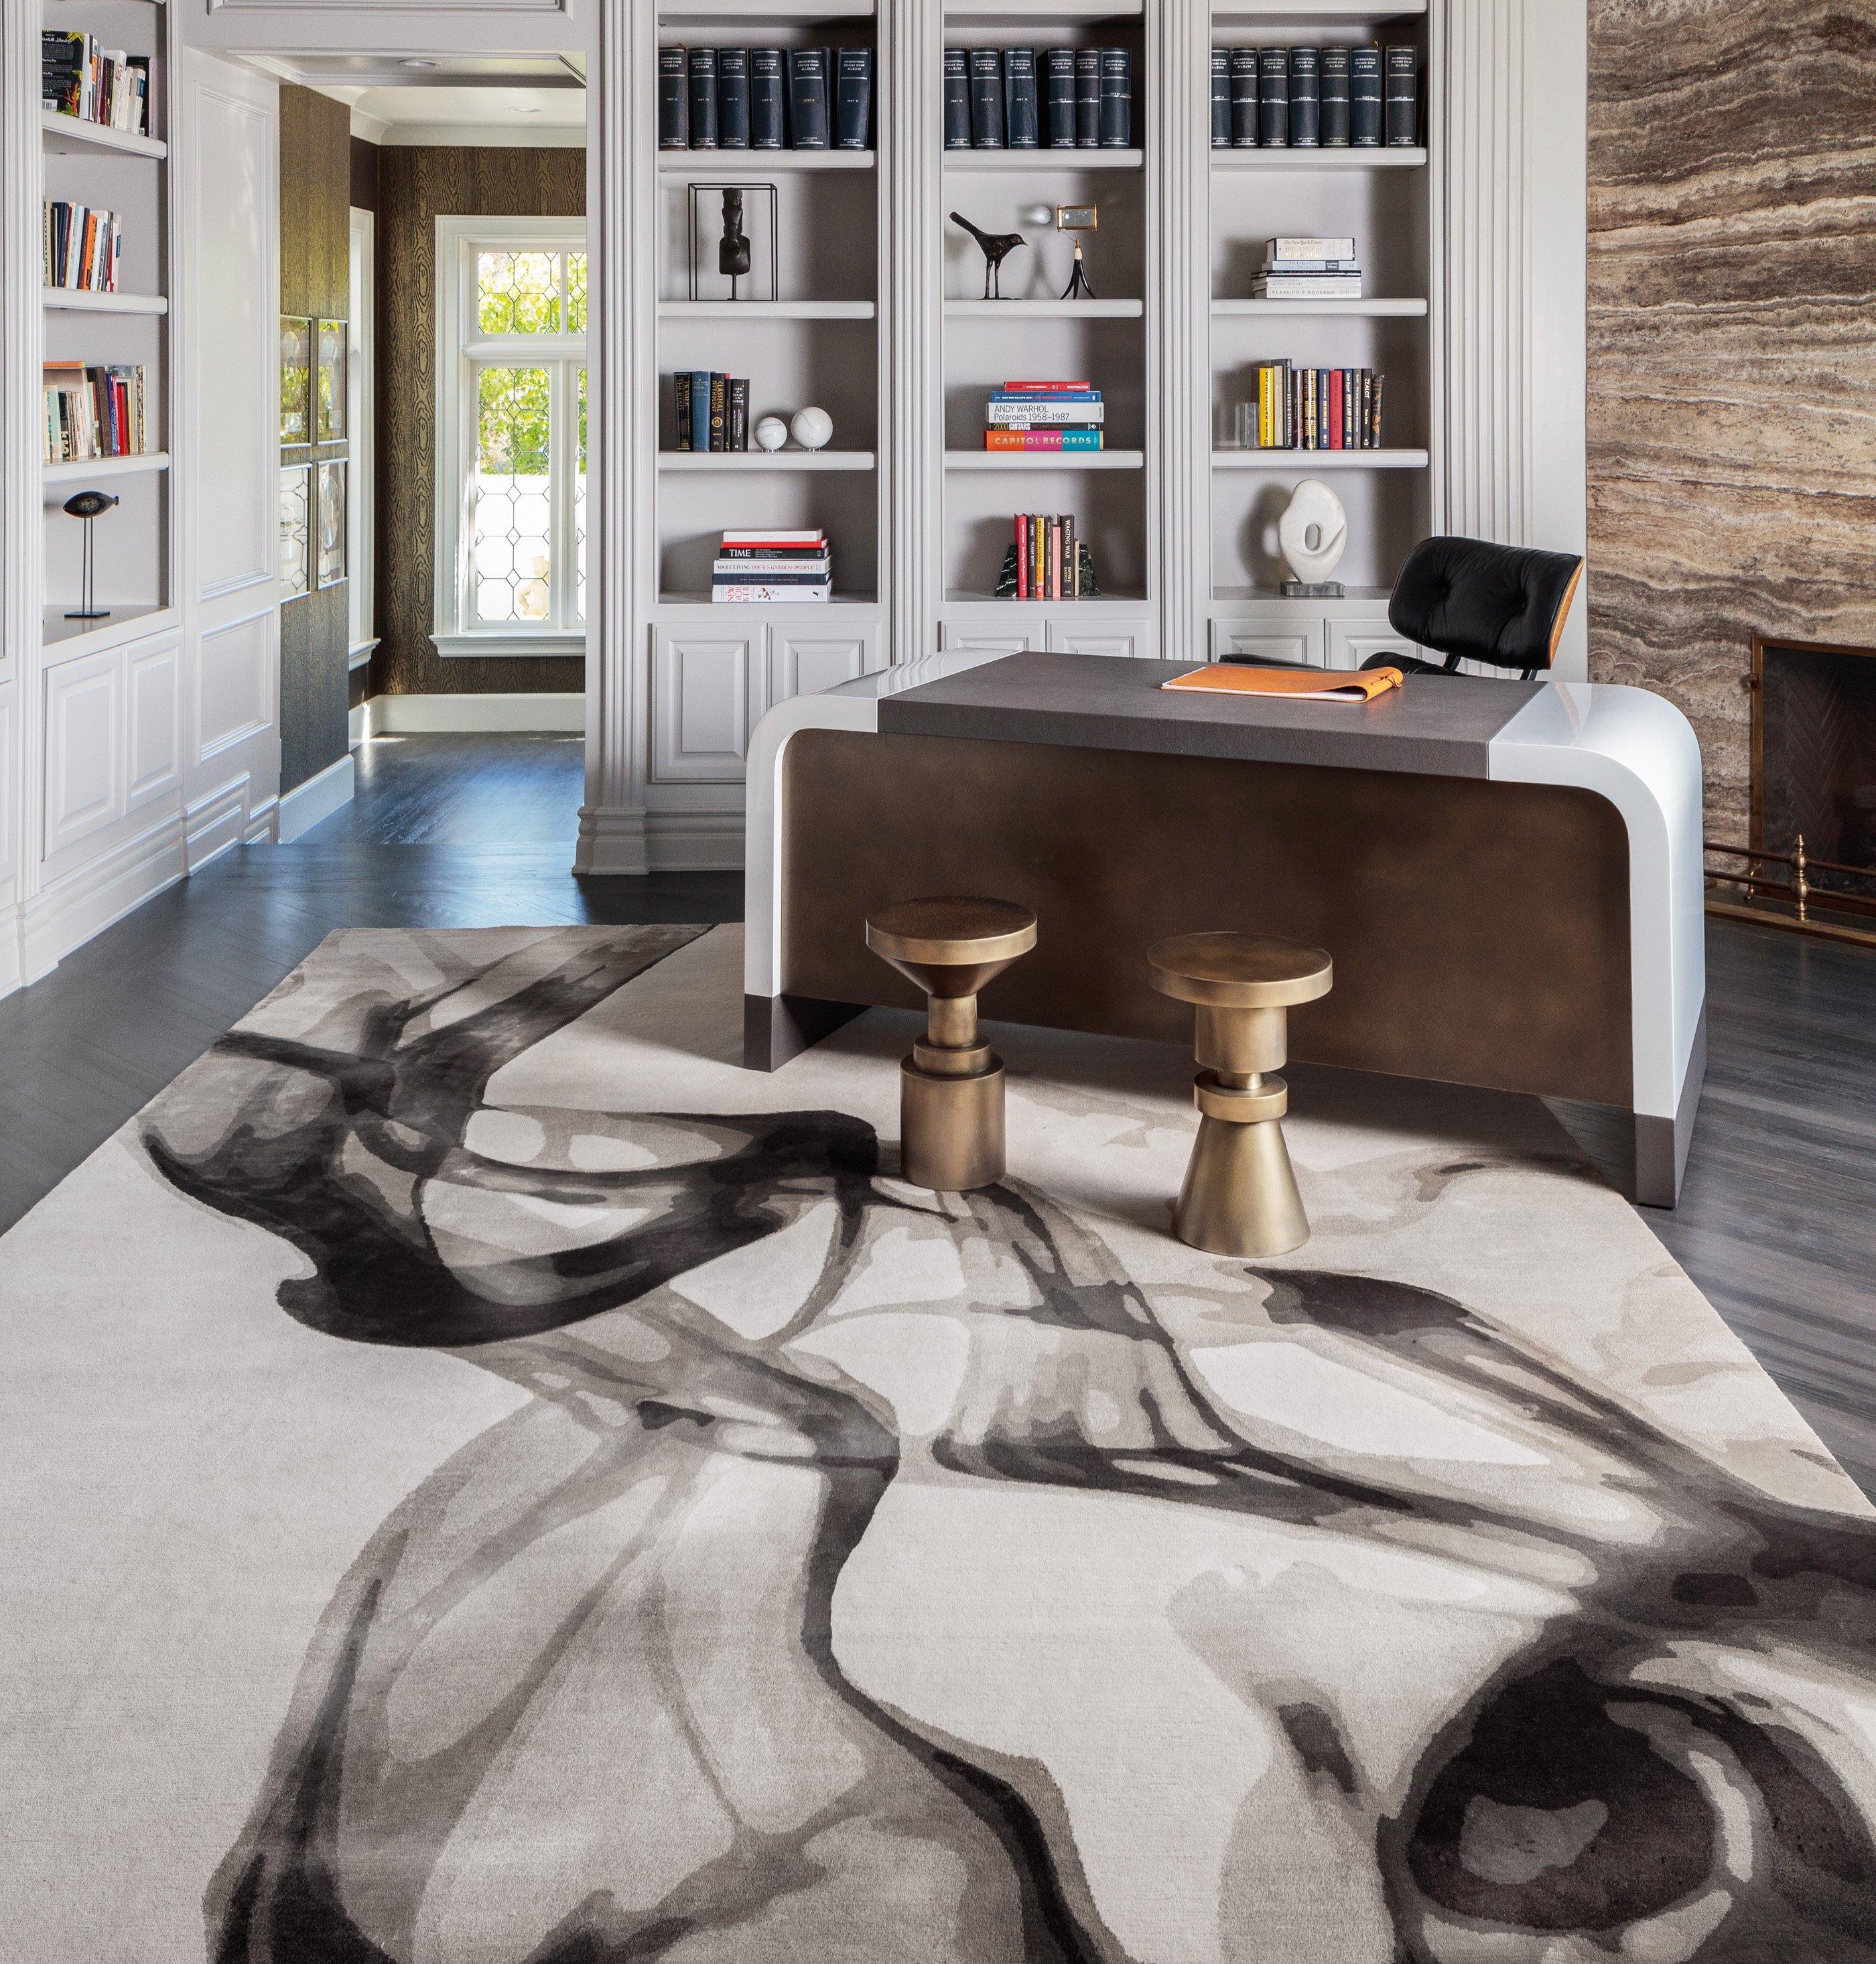 The abstract Smoke rug brings the intangible nature of smoke into the soft plane of a hand-knotted rug. Wool and silk yarns are carefully twisted and blended to achieve a subtle ethereal effect, helping to smoothly blend the 16 different shades at